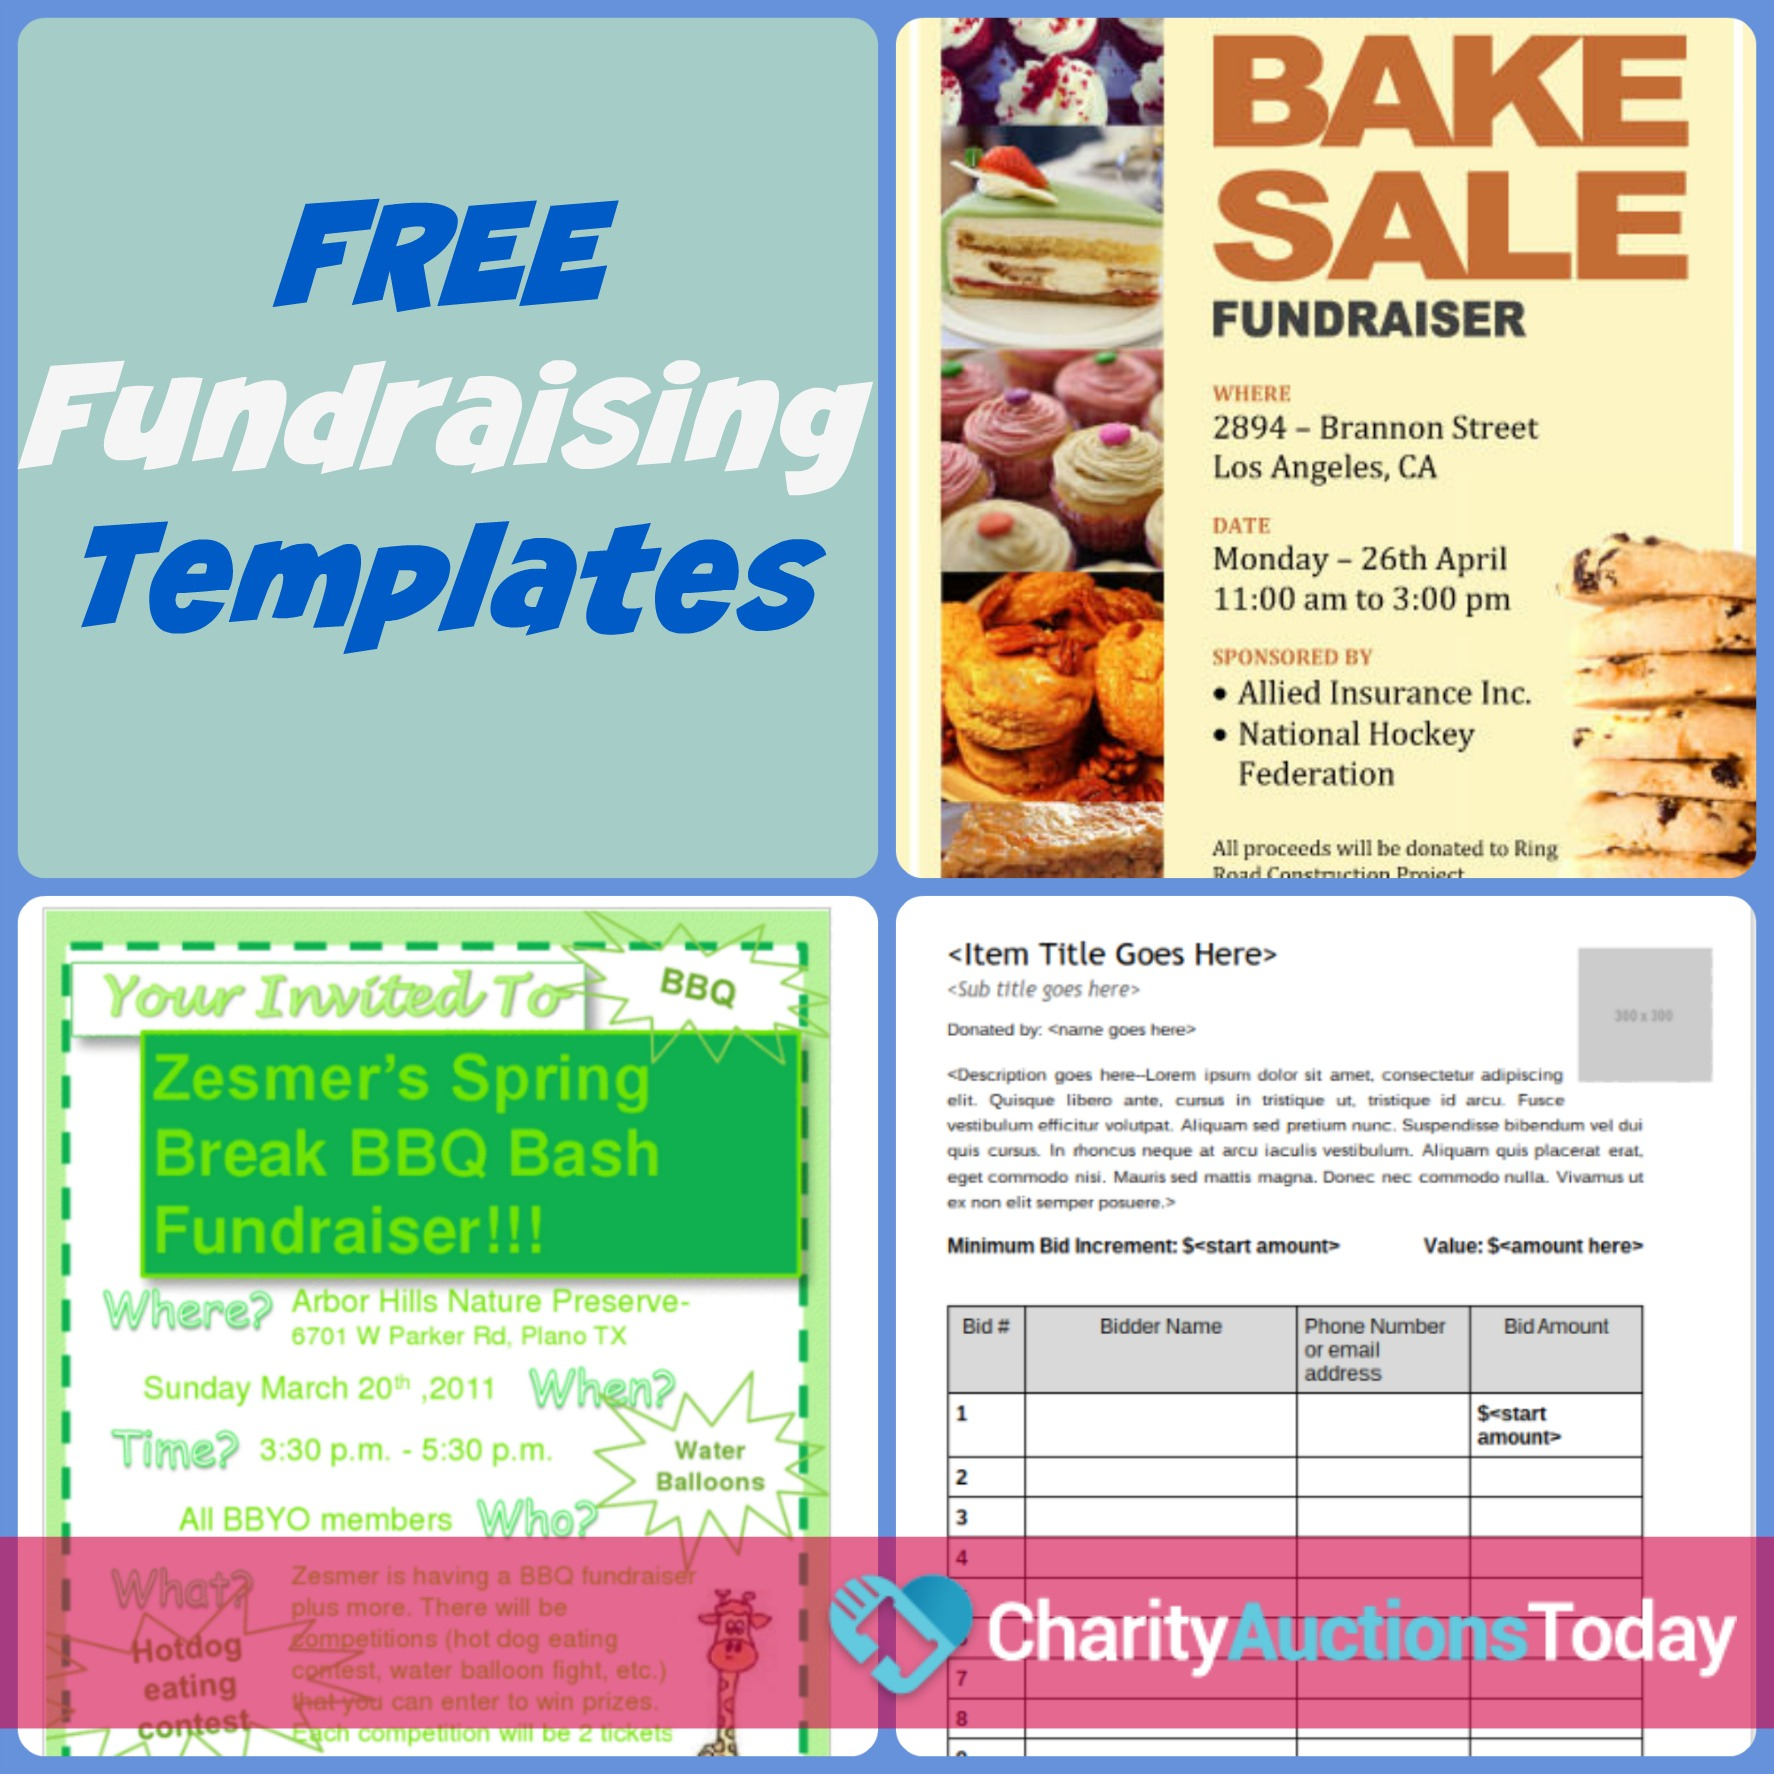 Free Fundraiser Flyer | Charity Auctions Today - Free Printable Flyer Maker Online